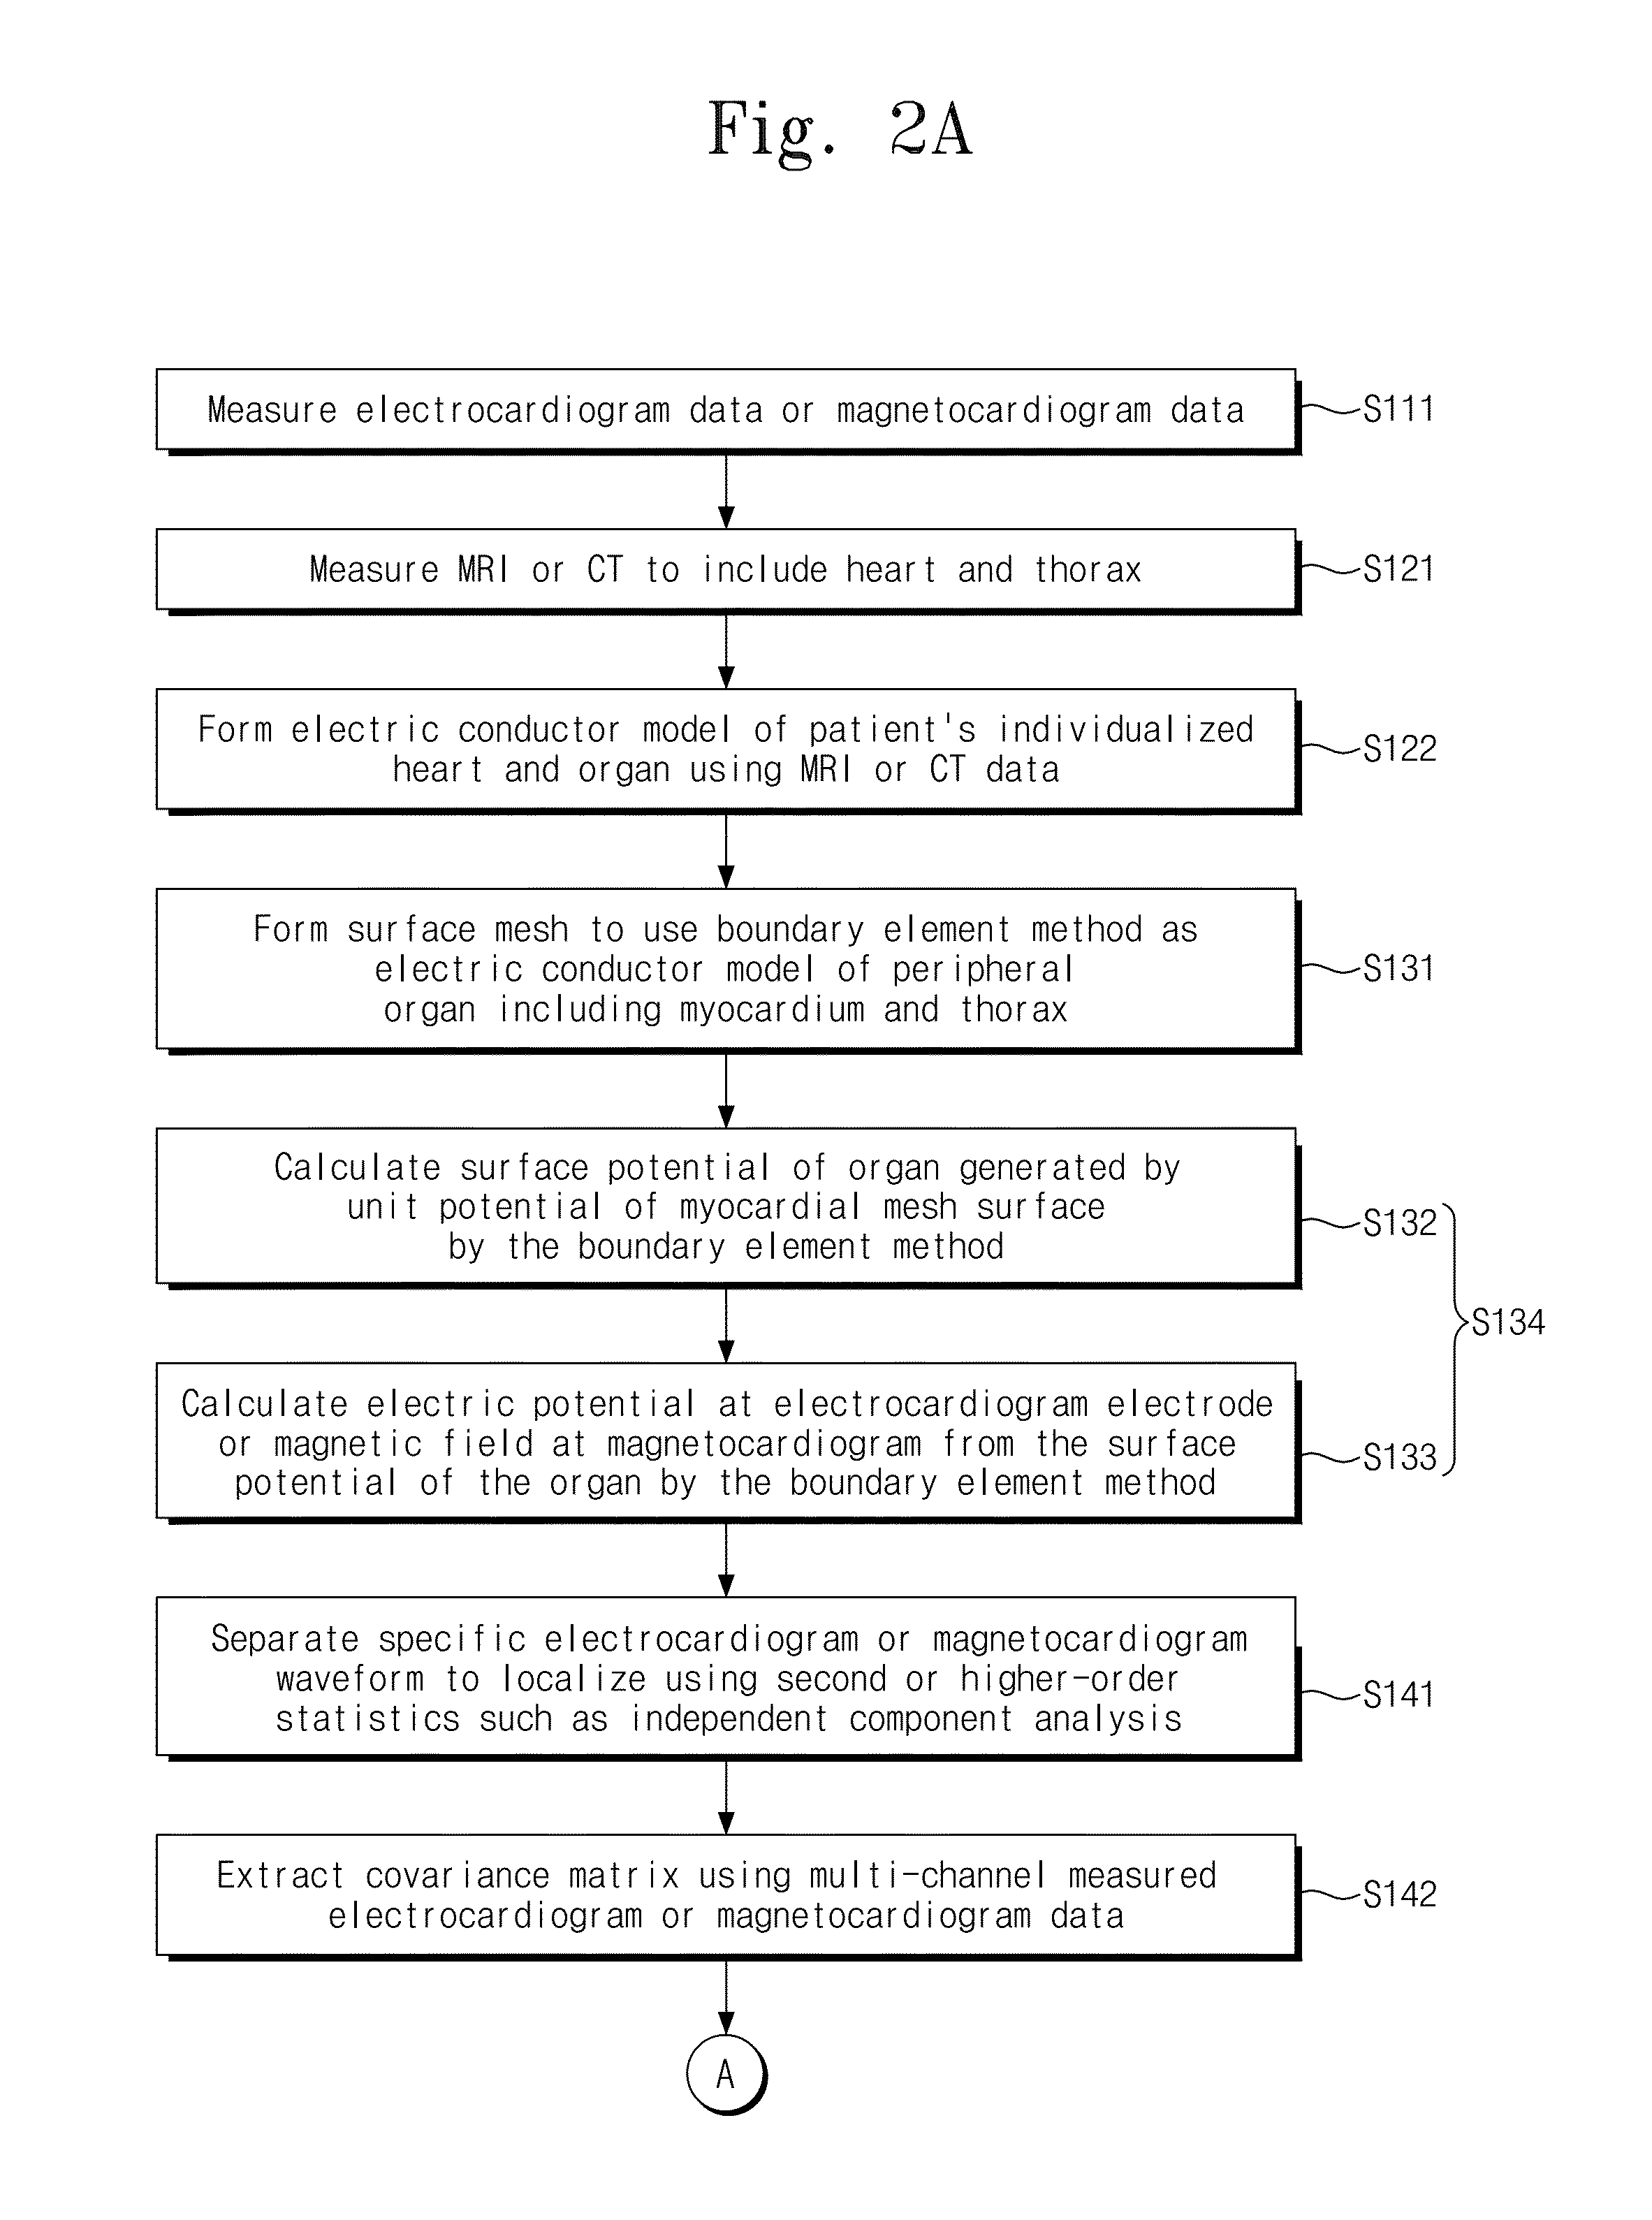 Method for non-invasive mapping of myocardial electric activity